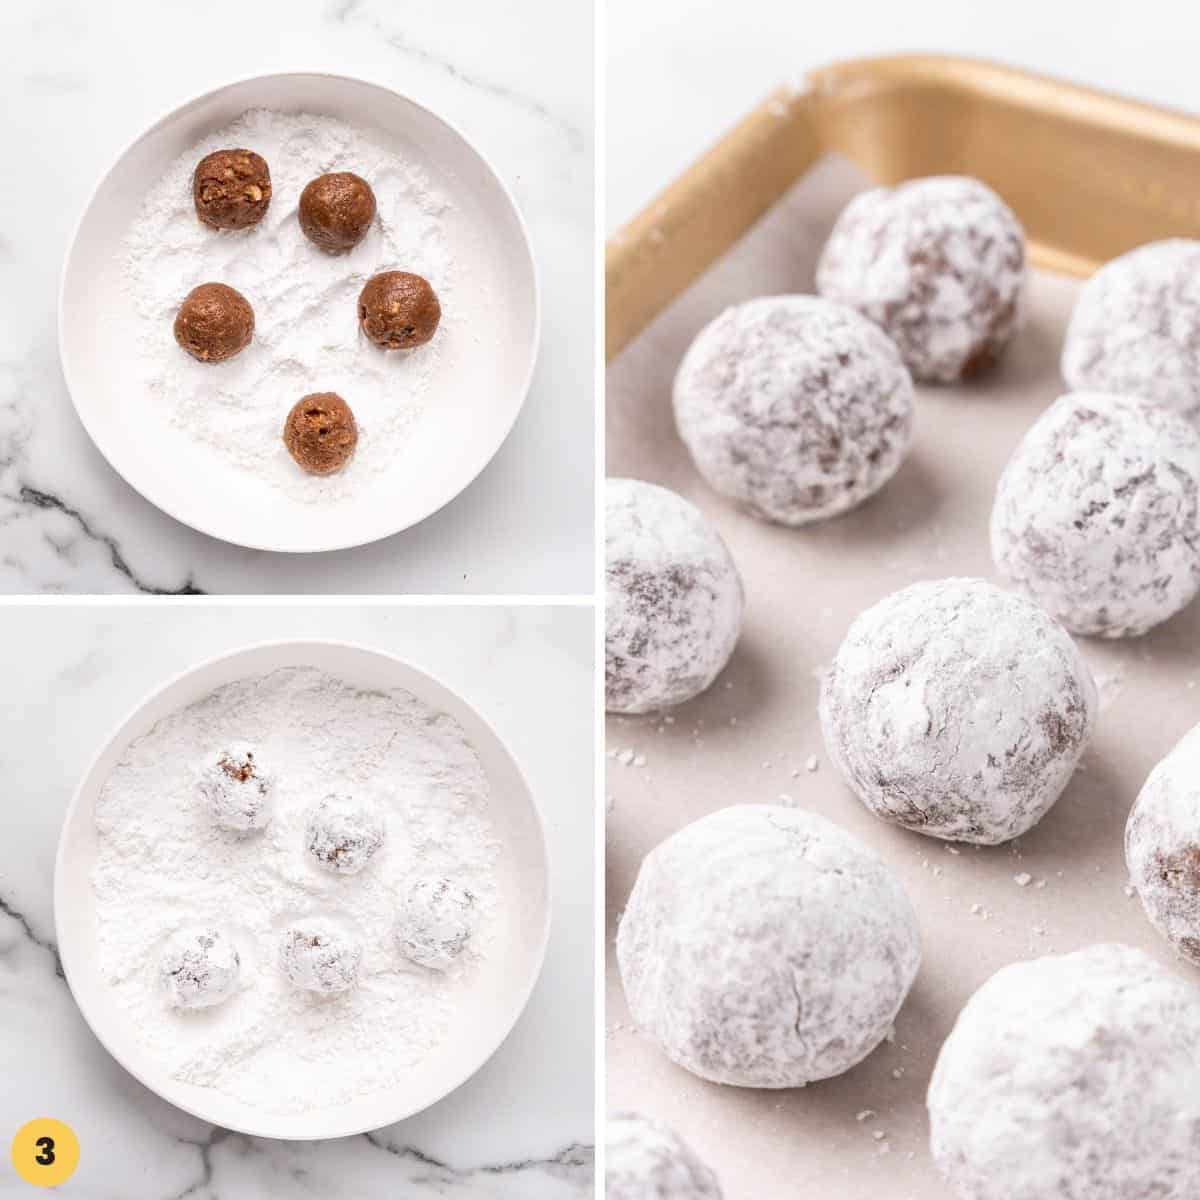 a collage of images showing how to roll rum balls and coat with powdered sugar.